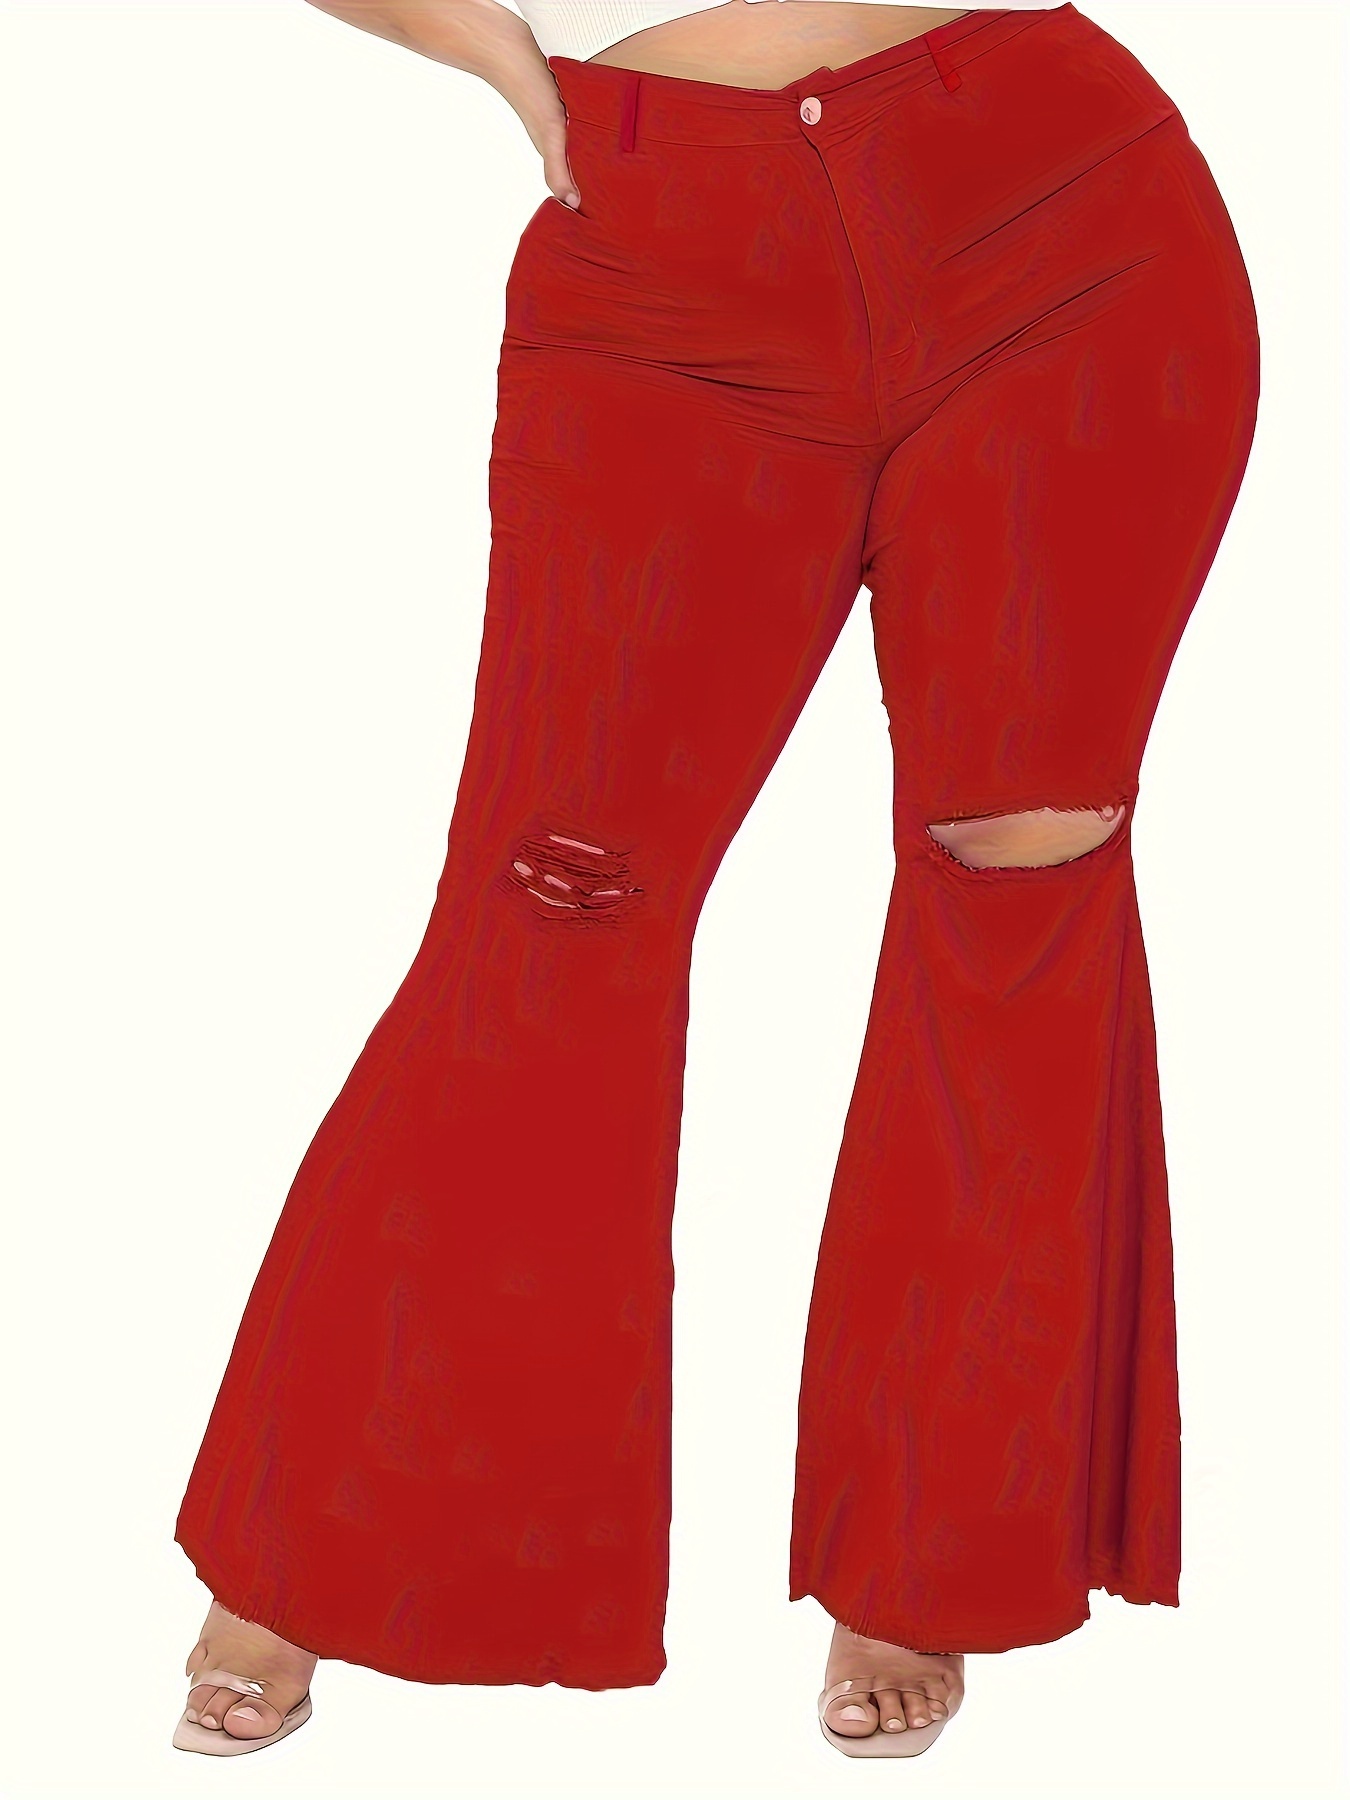 Red Hot Super Flare Bell Bottom Jeans, Stretch & Pockets! Sz 11/30 -  Ladybugs Boutique